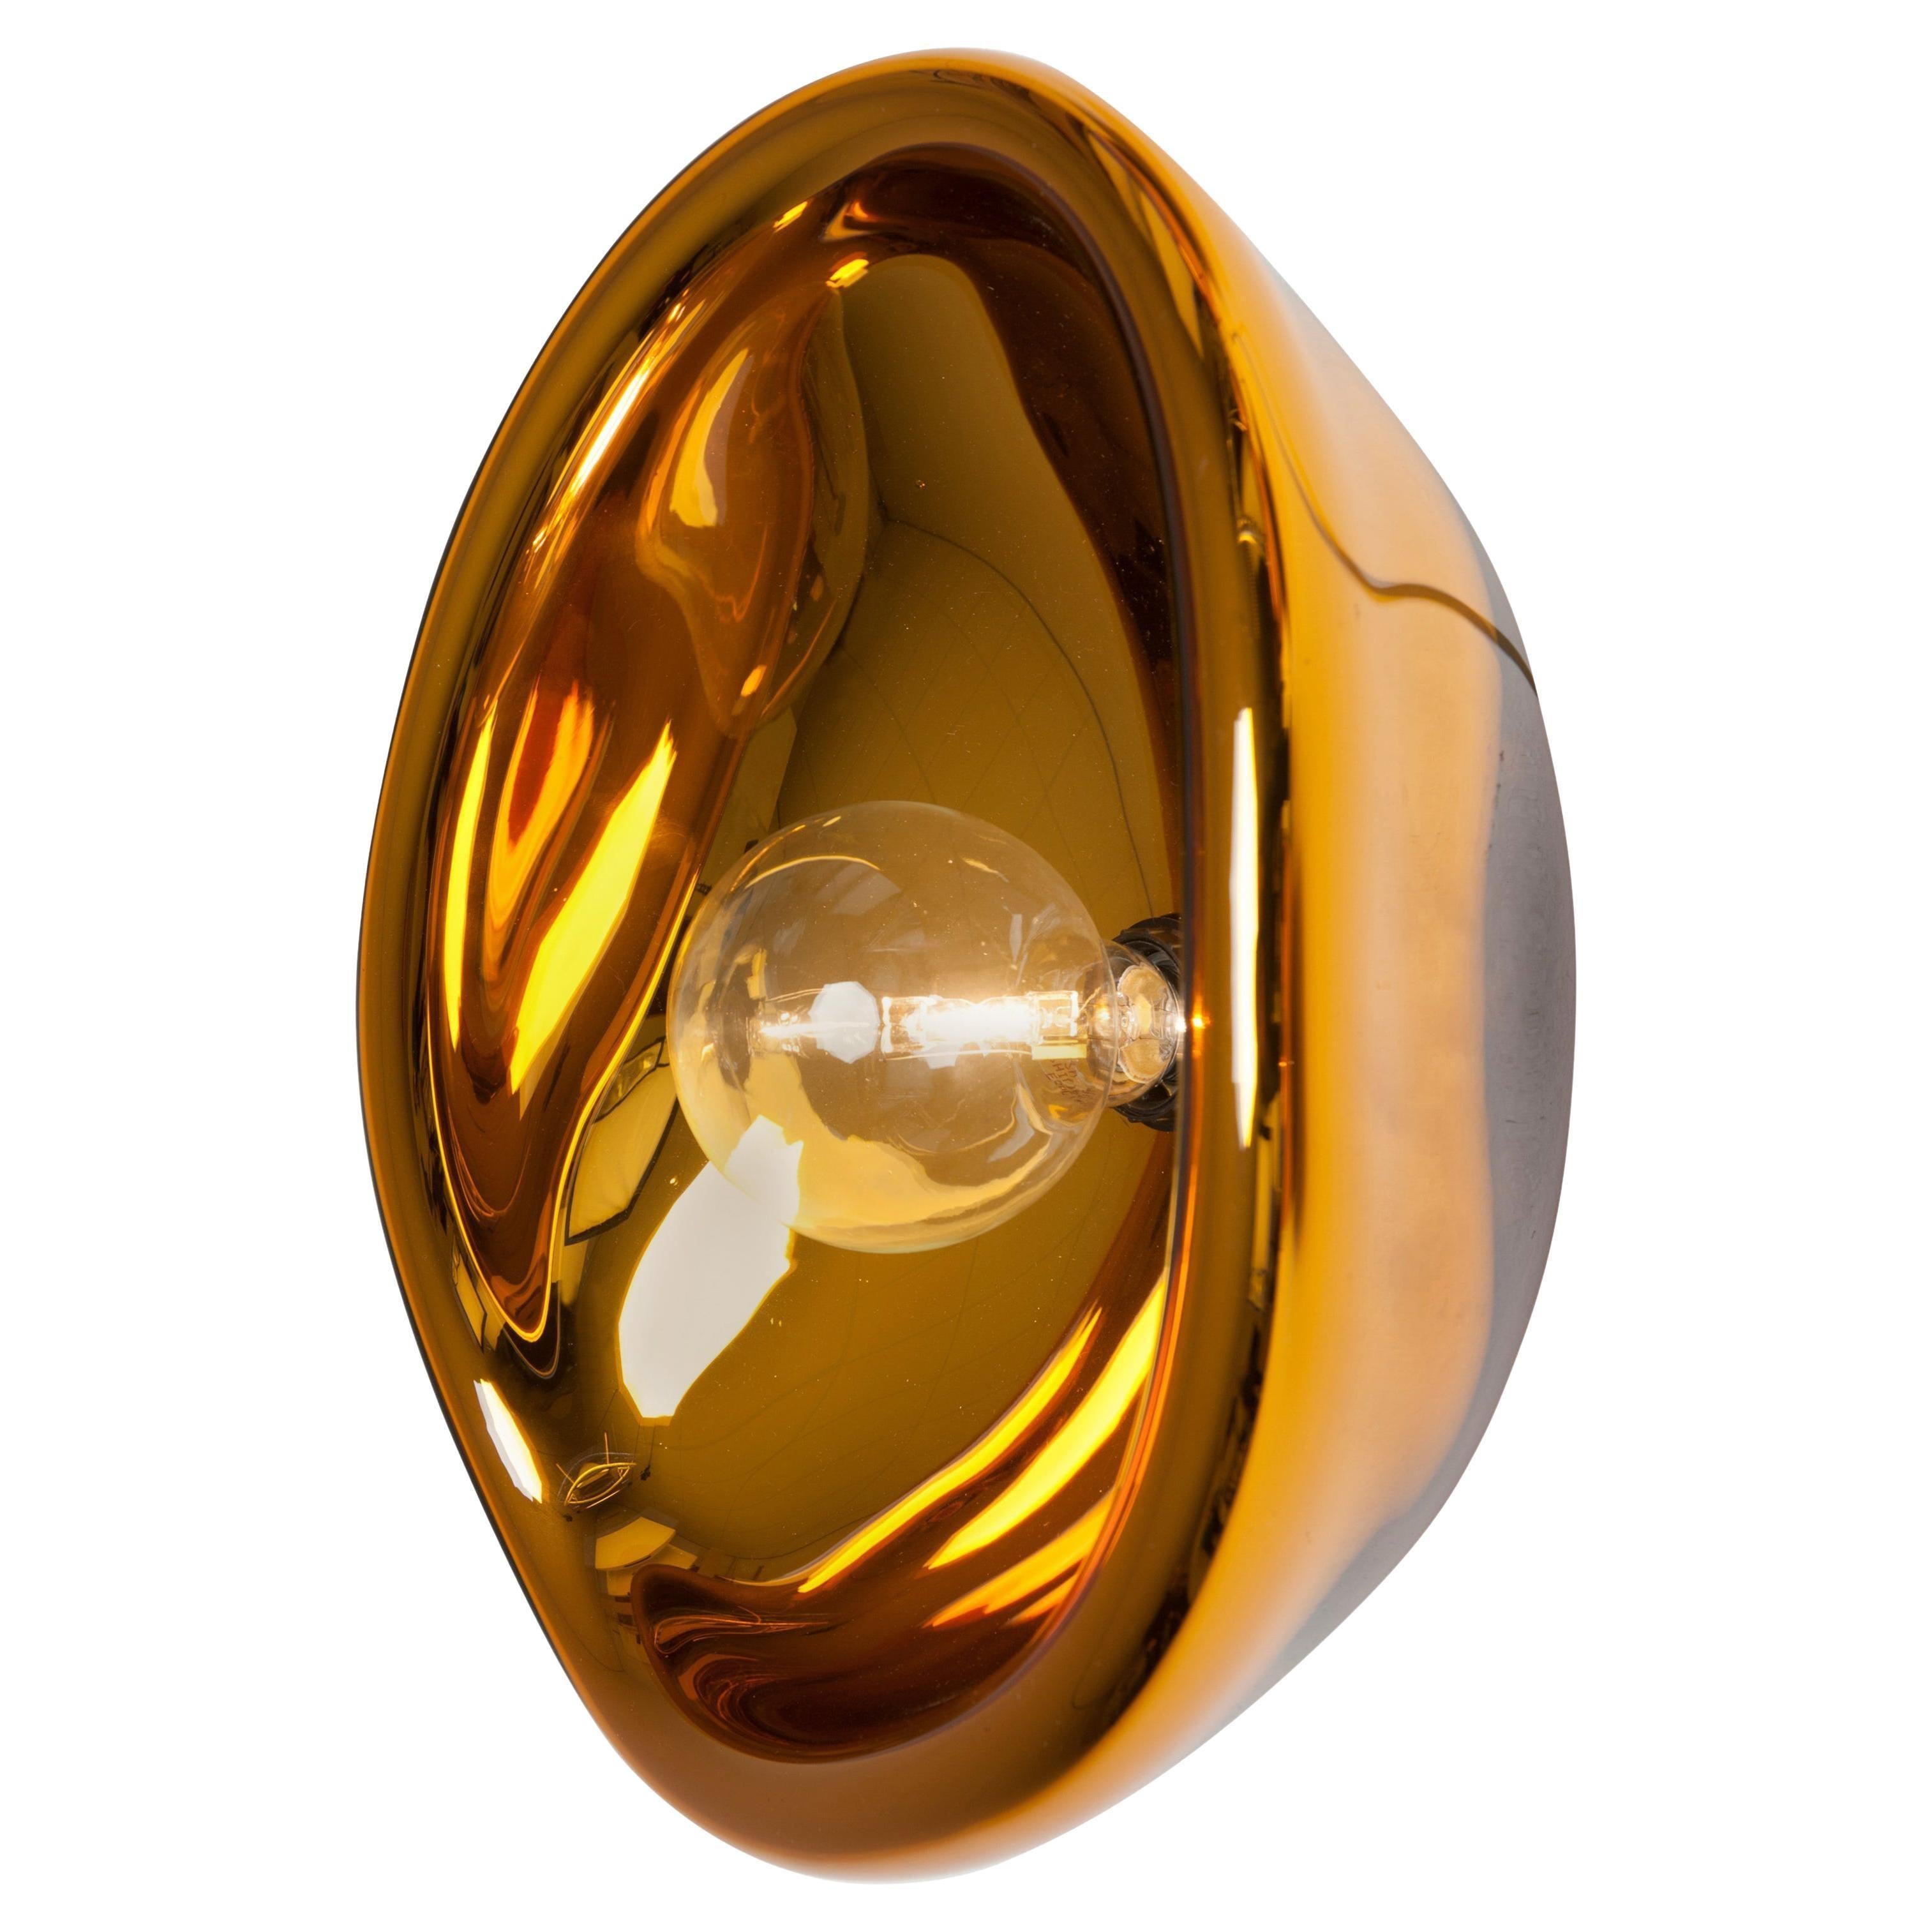 Aurum glass sconces by Alex de Witte
Dimensions:
Small: 20 x 30 cm 

Aurum shows how Alex de Wite is able to convey movement within a frozen form. As glass is liquid and filled with air while producing, he has captured different shapes in the